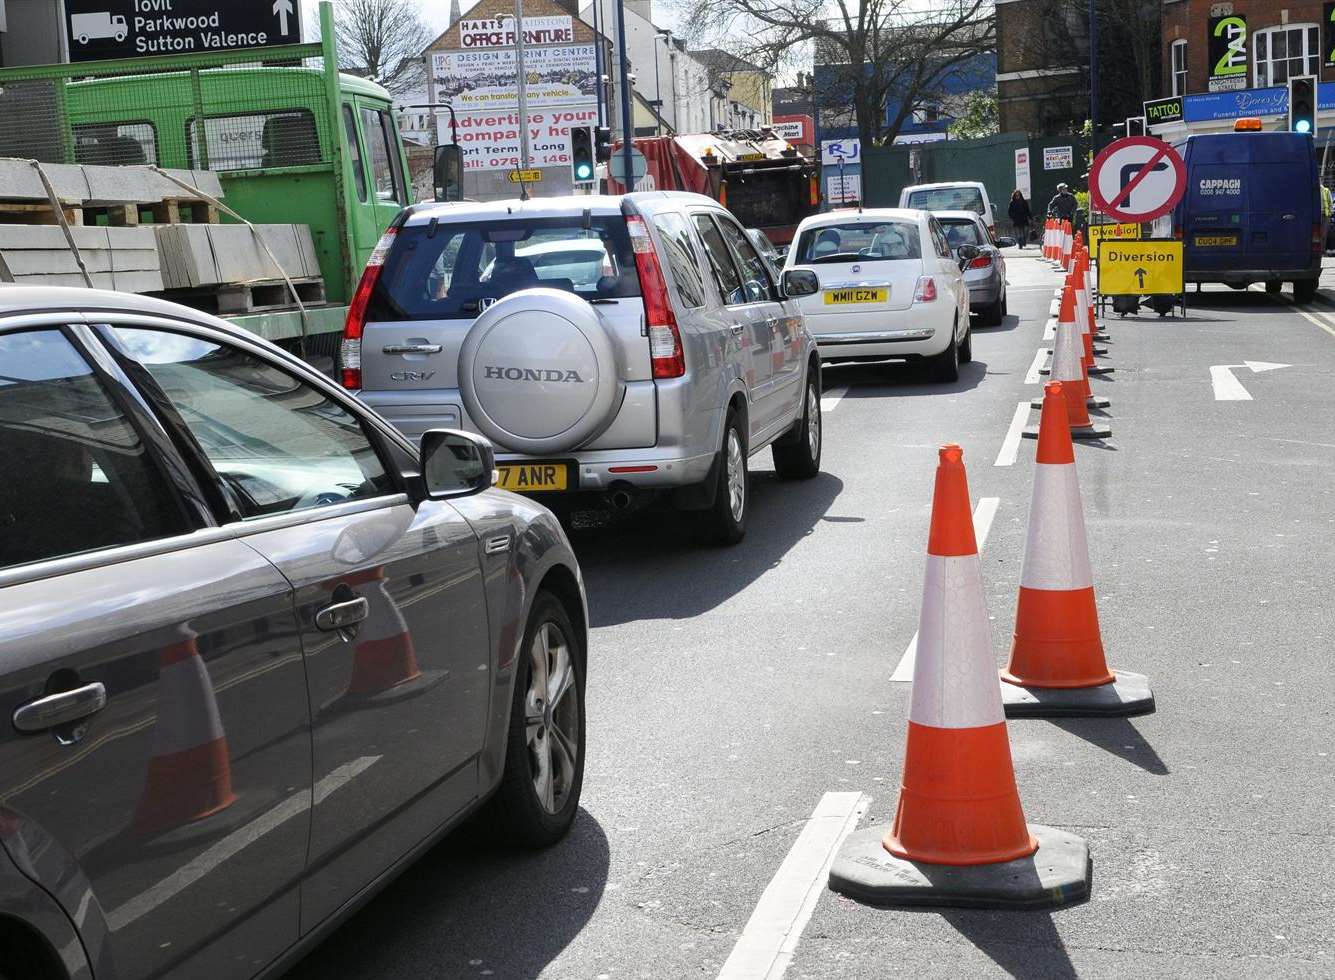 Three years ago gas works brought traffic congestion to Maidstone for months